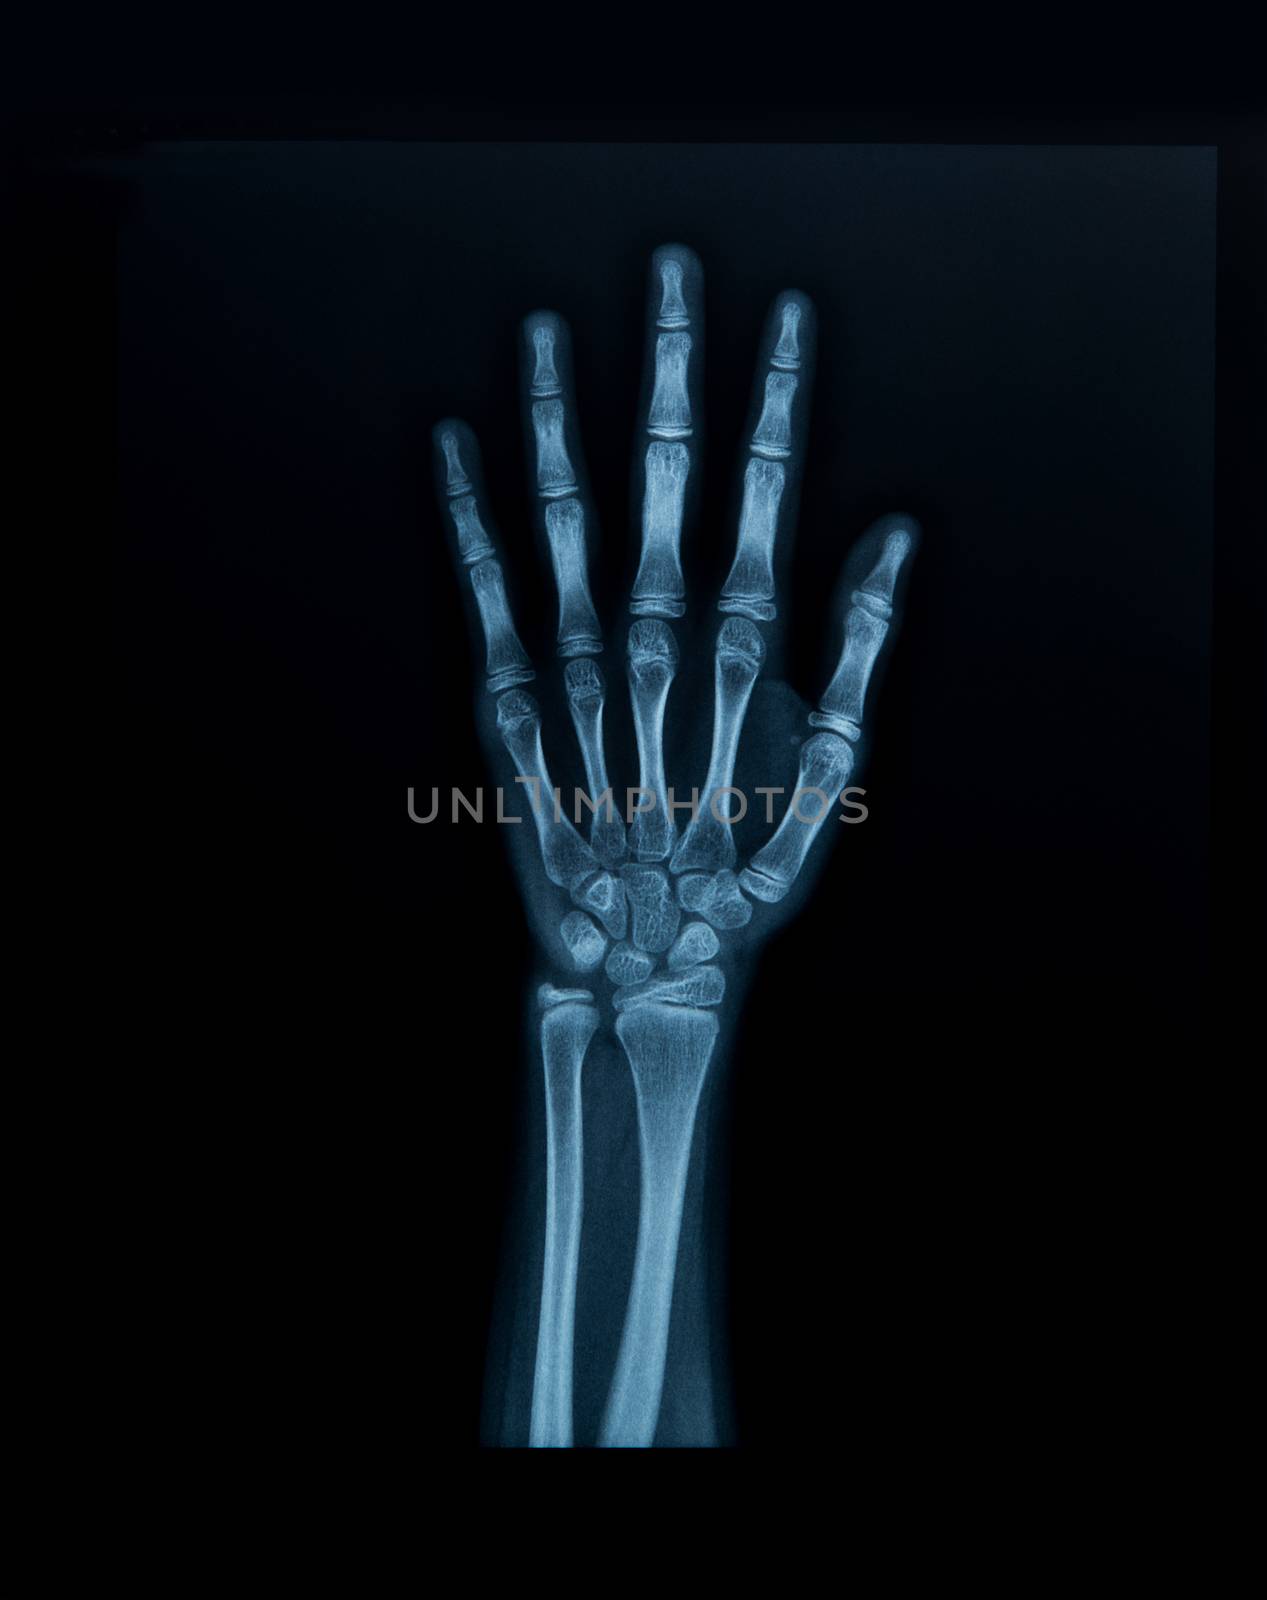 x-ray hand by antpkr